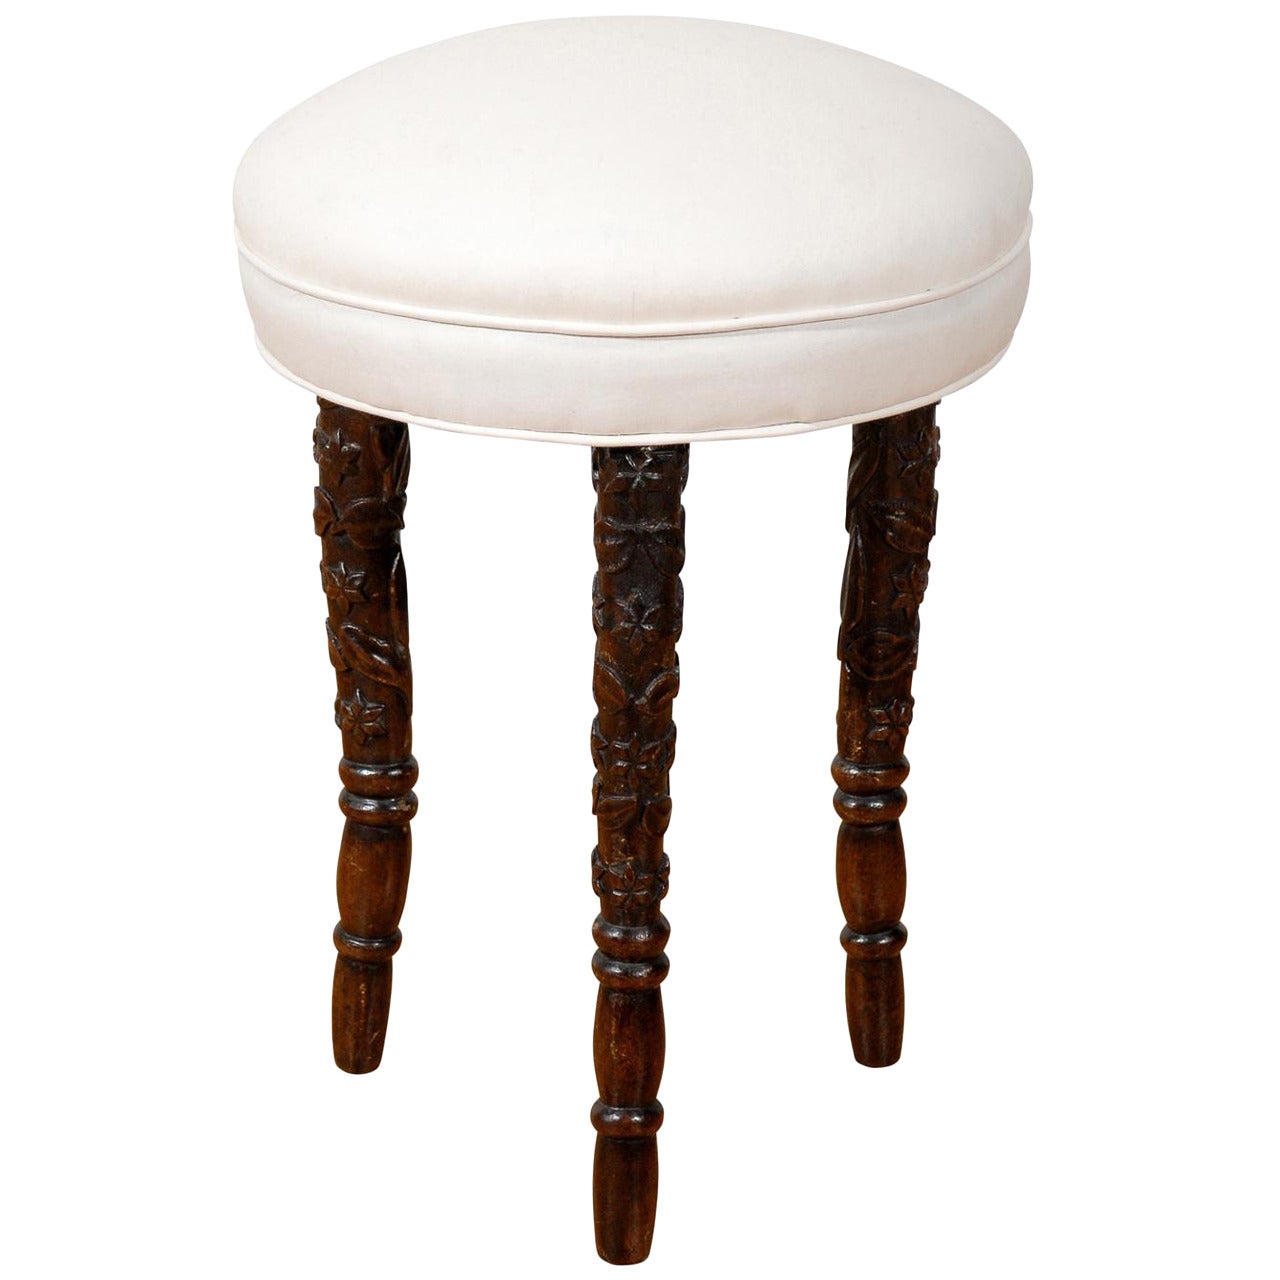 Black Forest German 1880s Single Stool with Upholstered Seat and Carved Legs